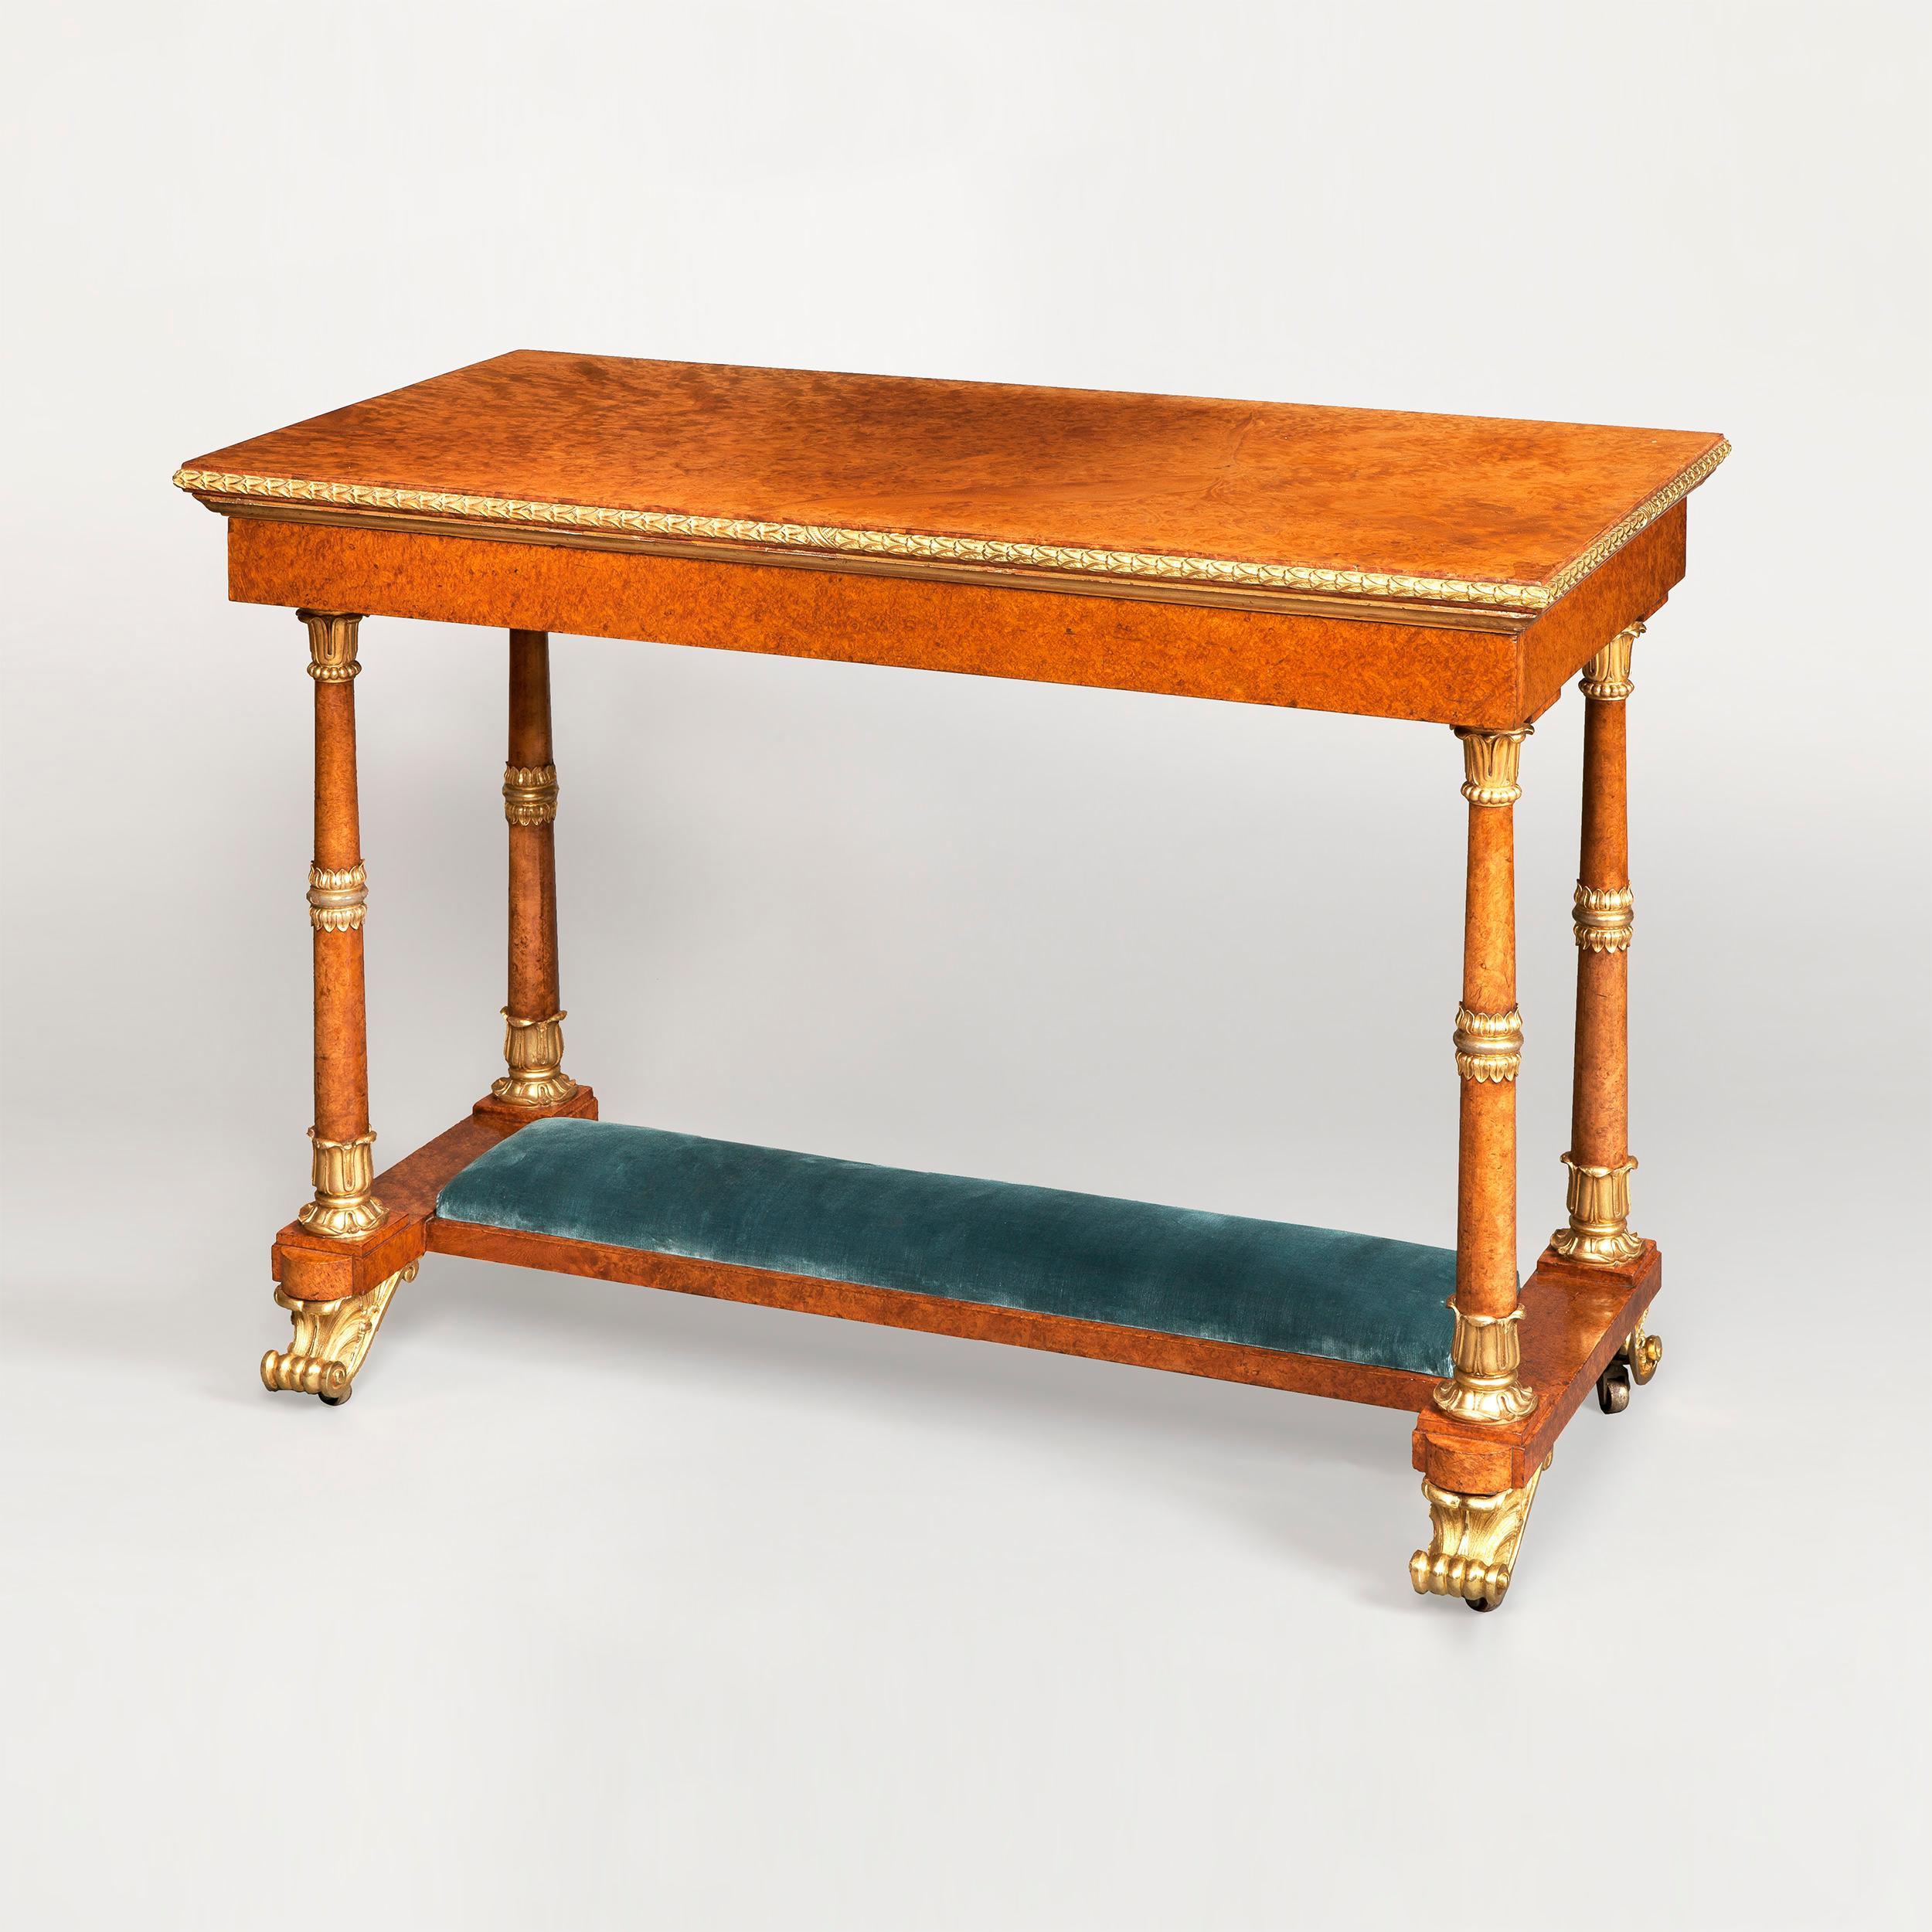 A highly important and rare royal table made by Morel & Seddon for the Windsor Castle Commission, commanded by George IV 

Constructed in Amboyna, with ormolu gilt bronze mounts, having highlights in parcel-gilt; rising from ormolu scroll feet cast